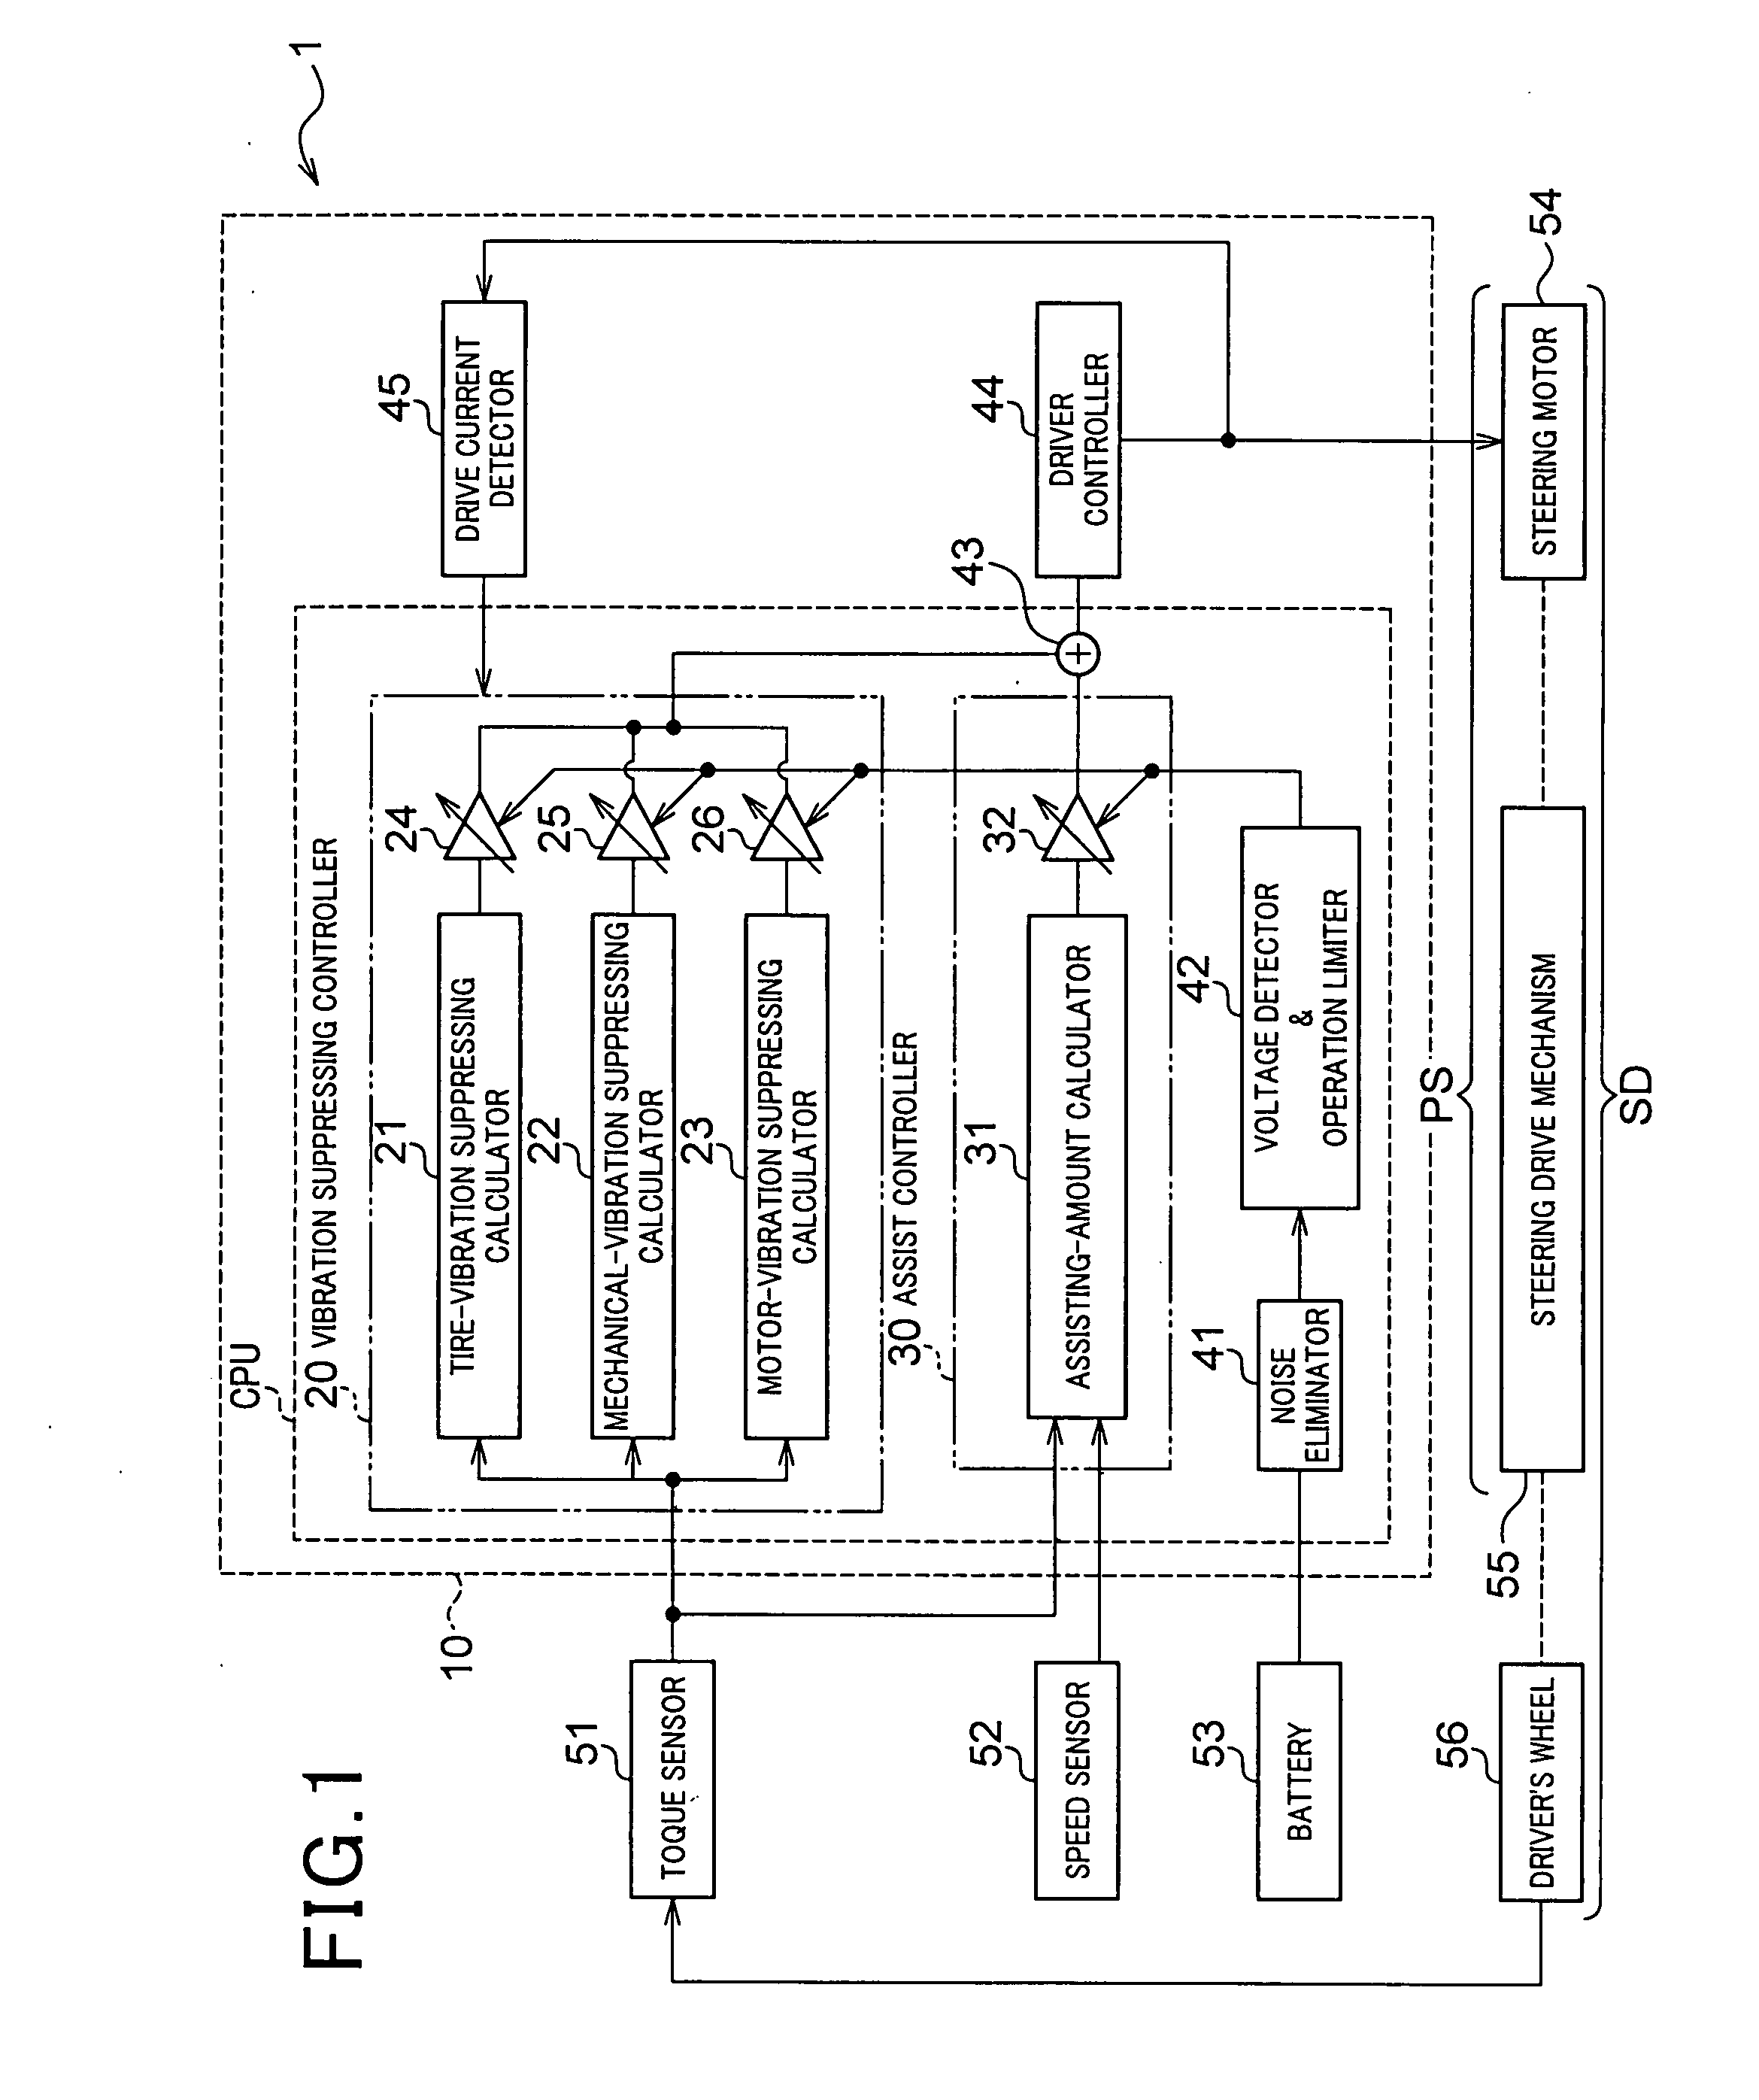 On-vehicle control apparatus powered by on-vehicle battery